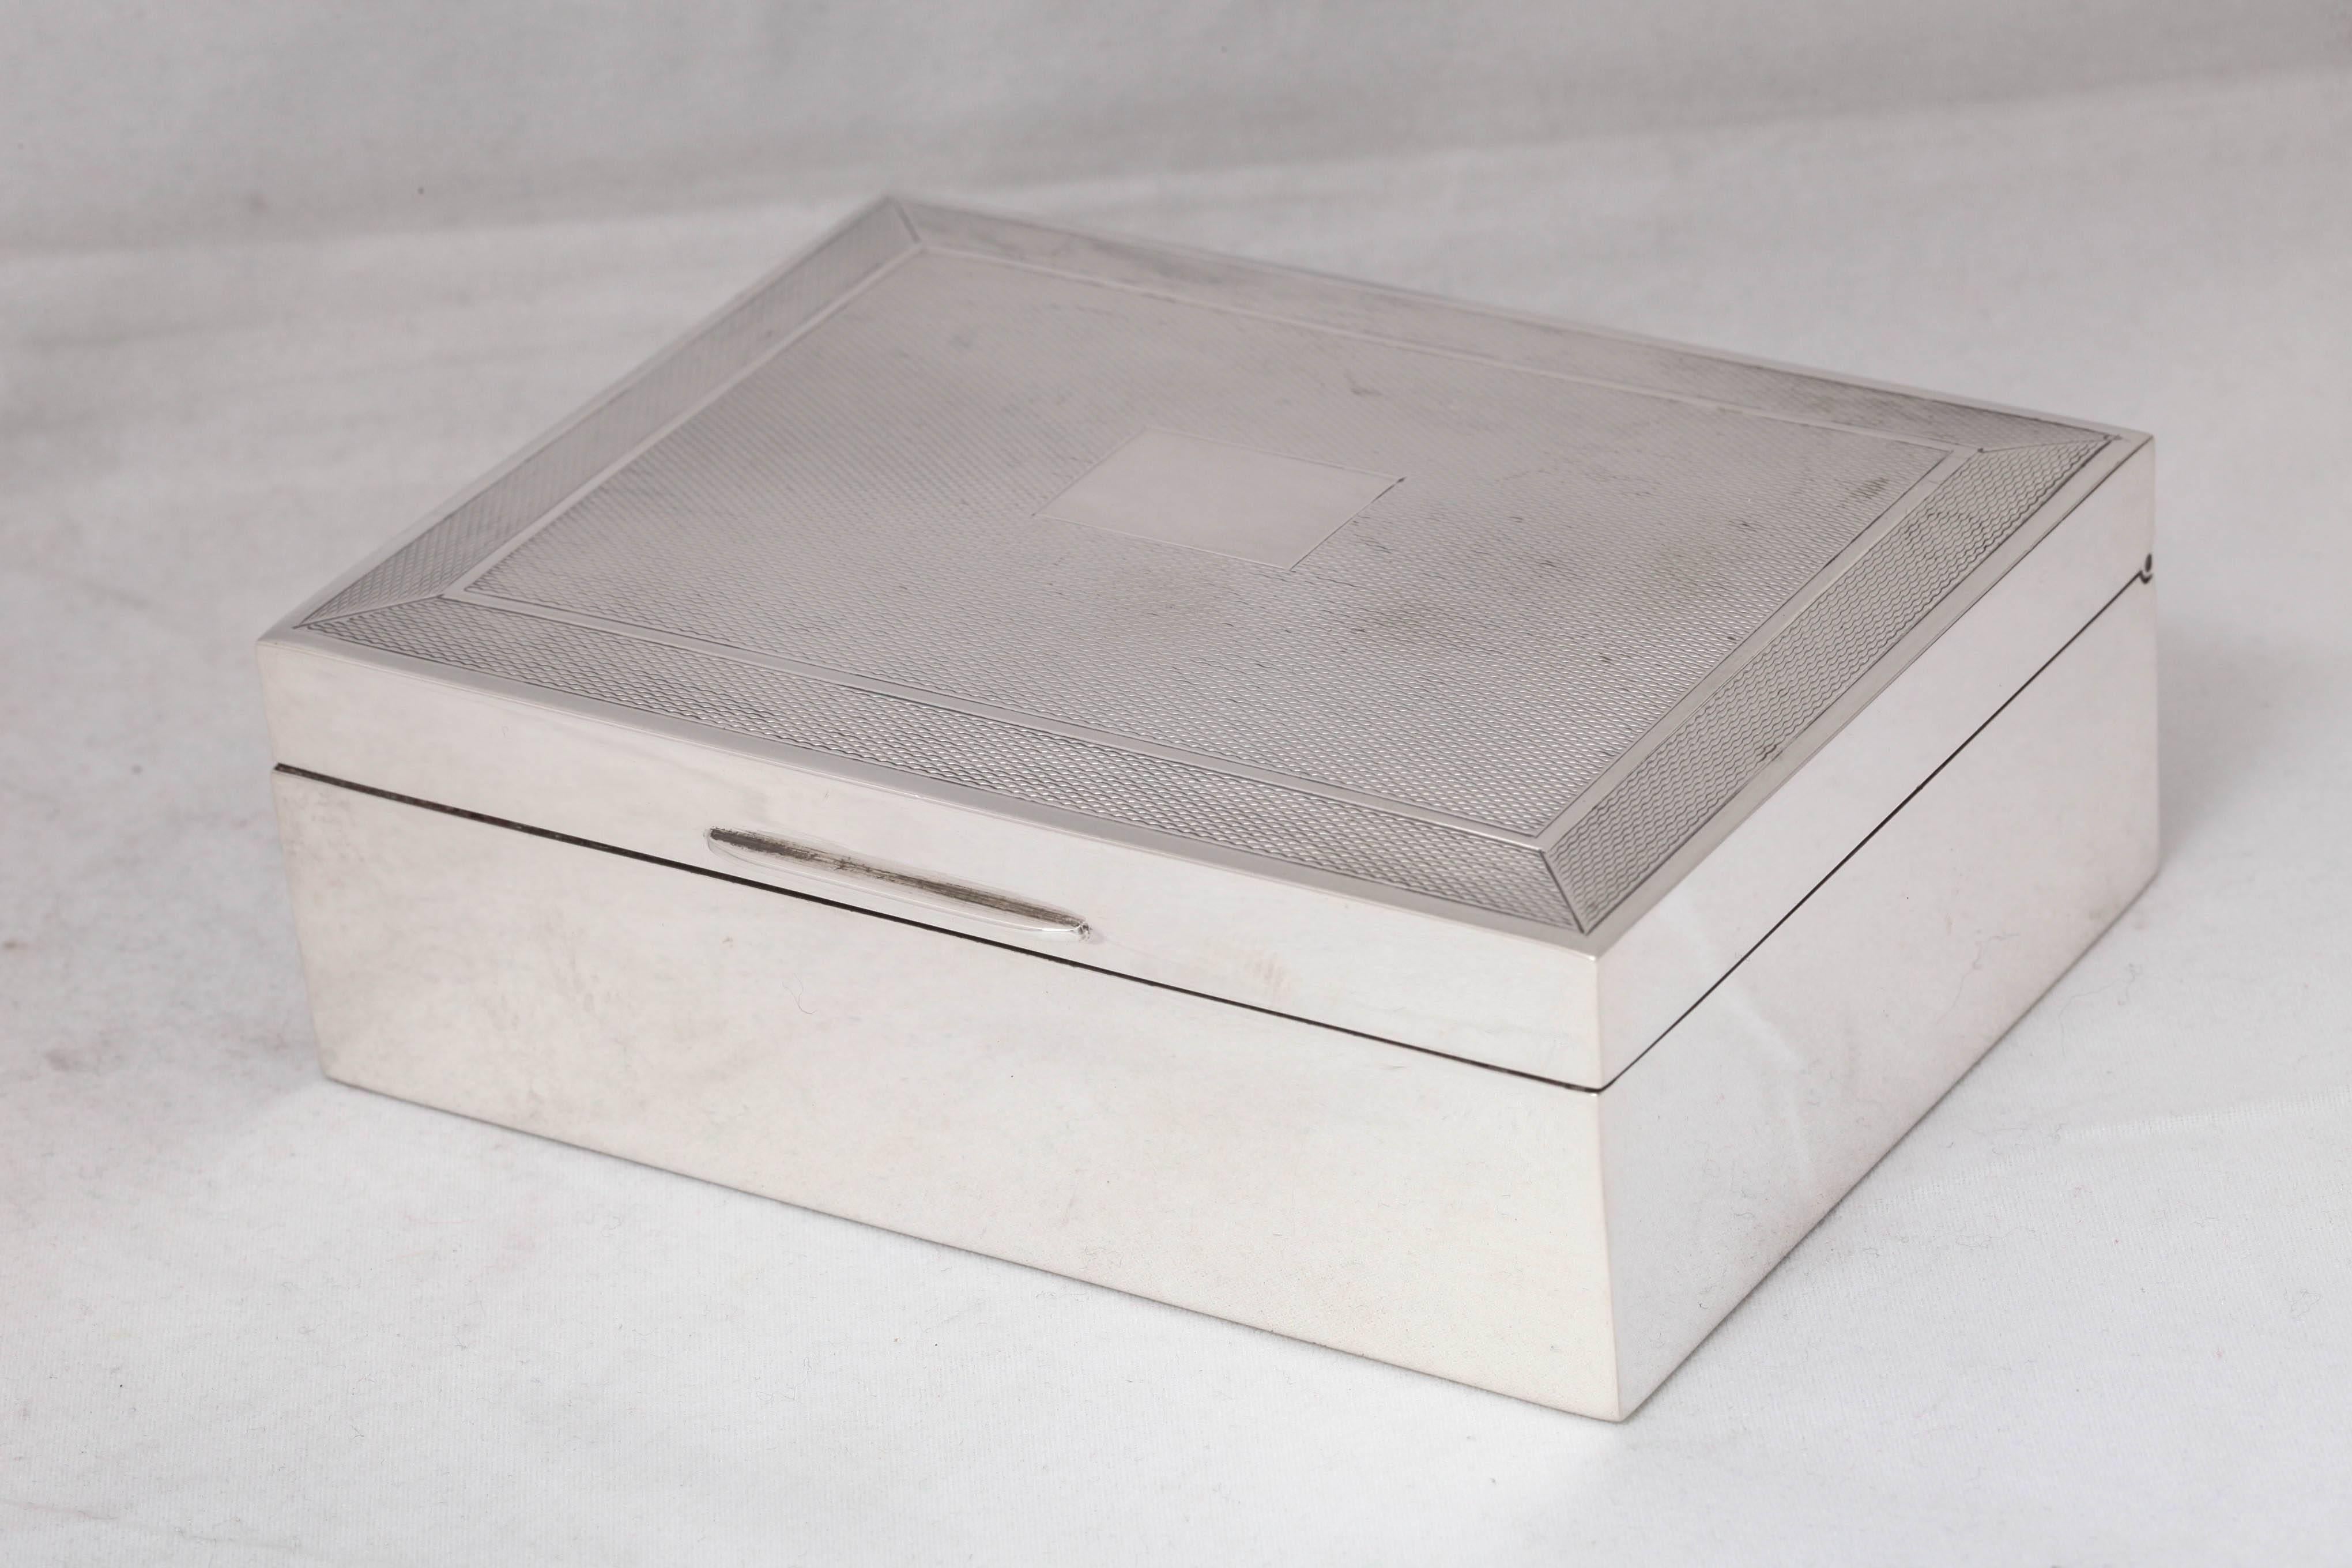 Art Deco, sterling silver table box with hinged lid, Birmingham, England, 1968, John Rose - maker. Engine-turned design on lid; vacant cartouche. Wood lined; leather underside. Measures: 4 3/4